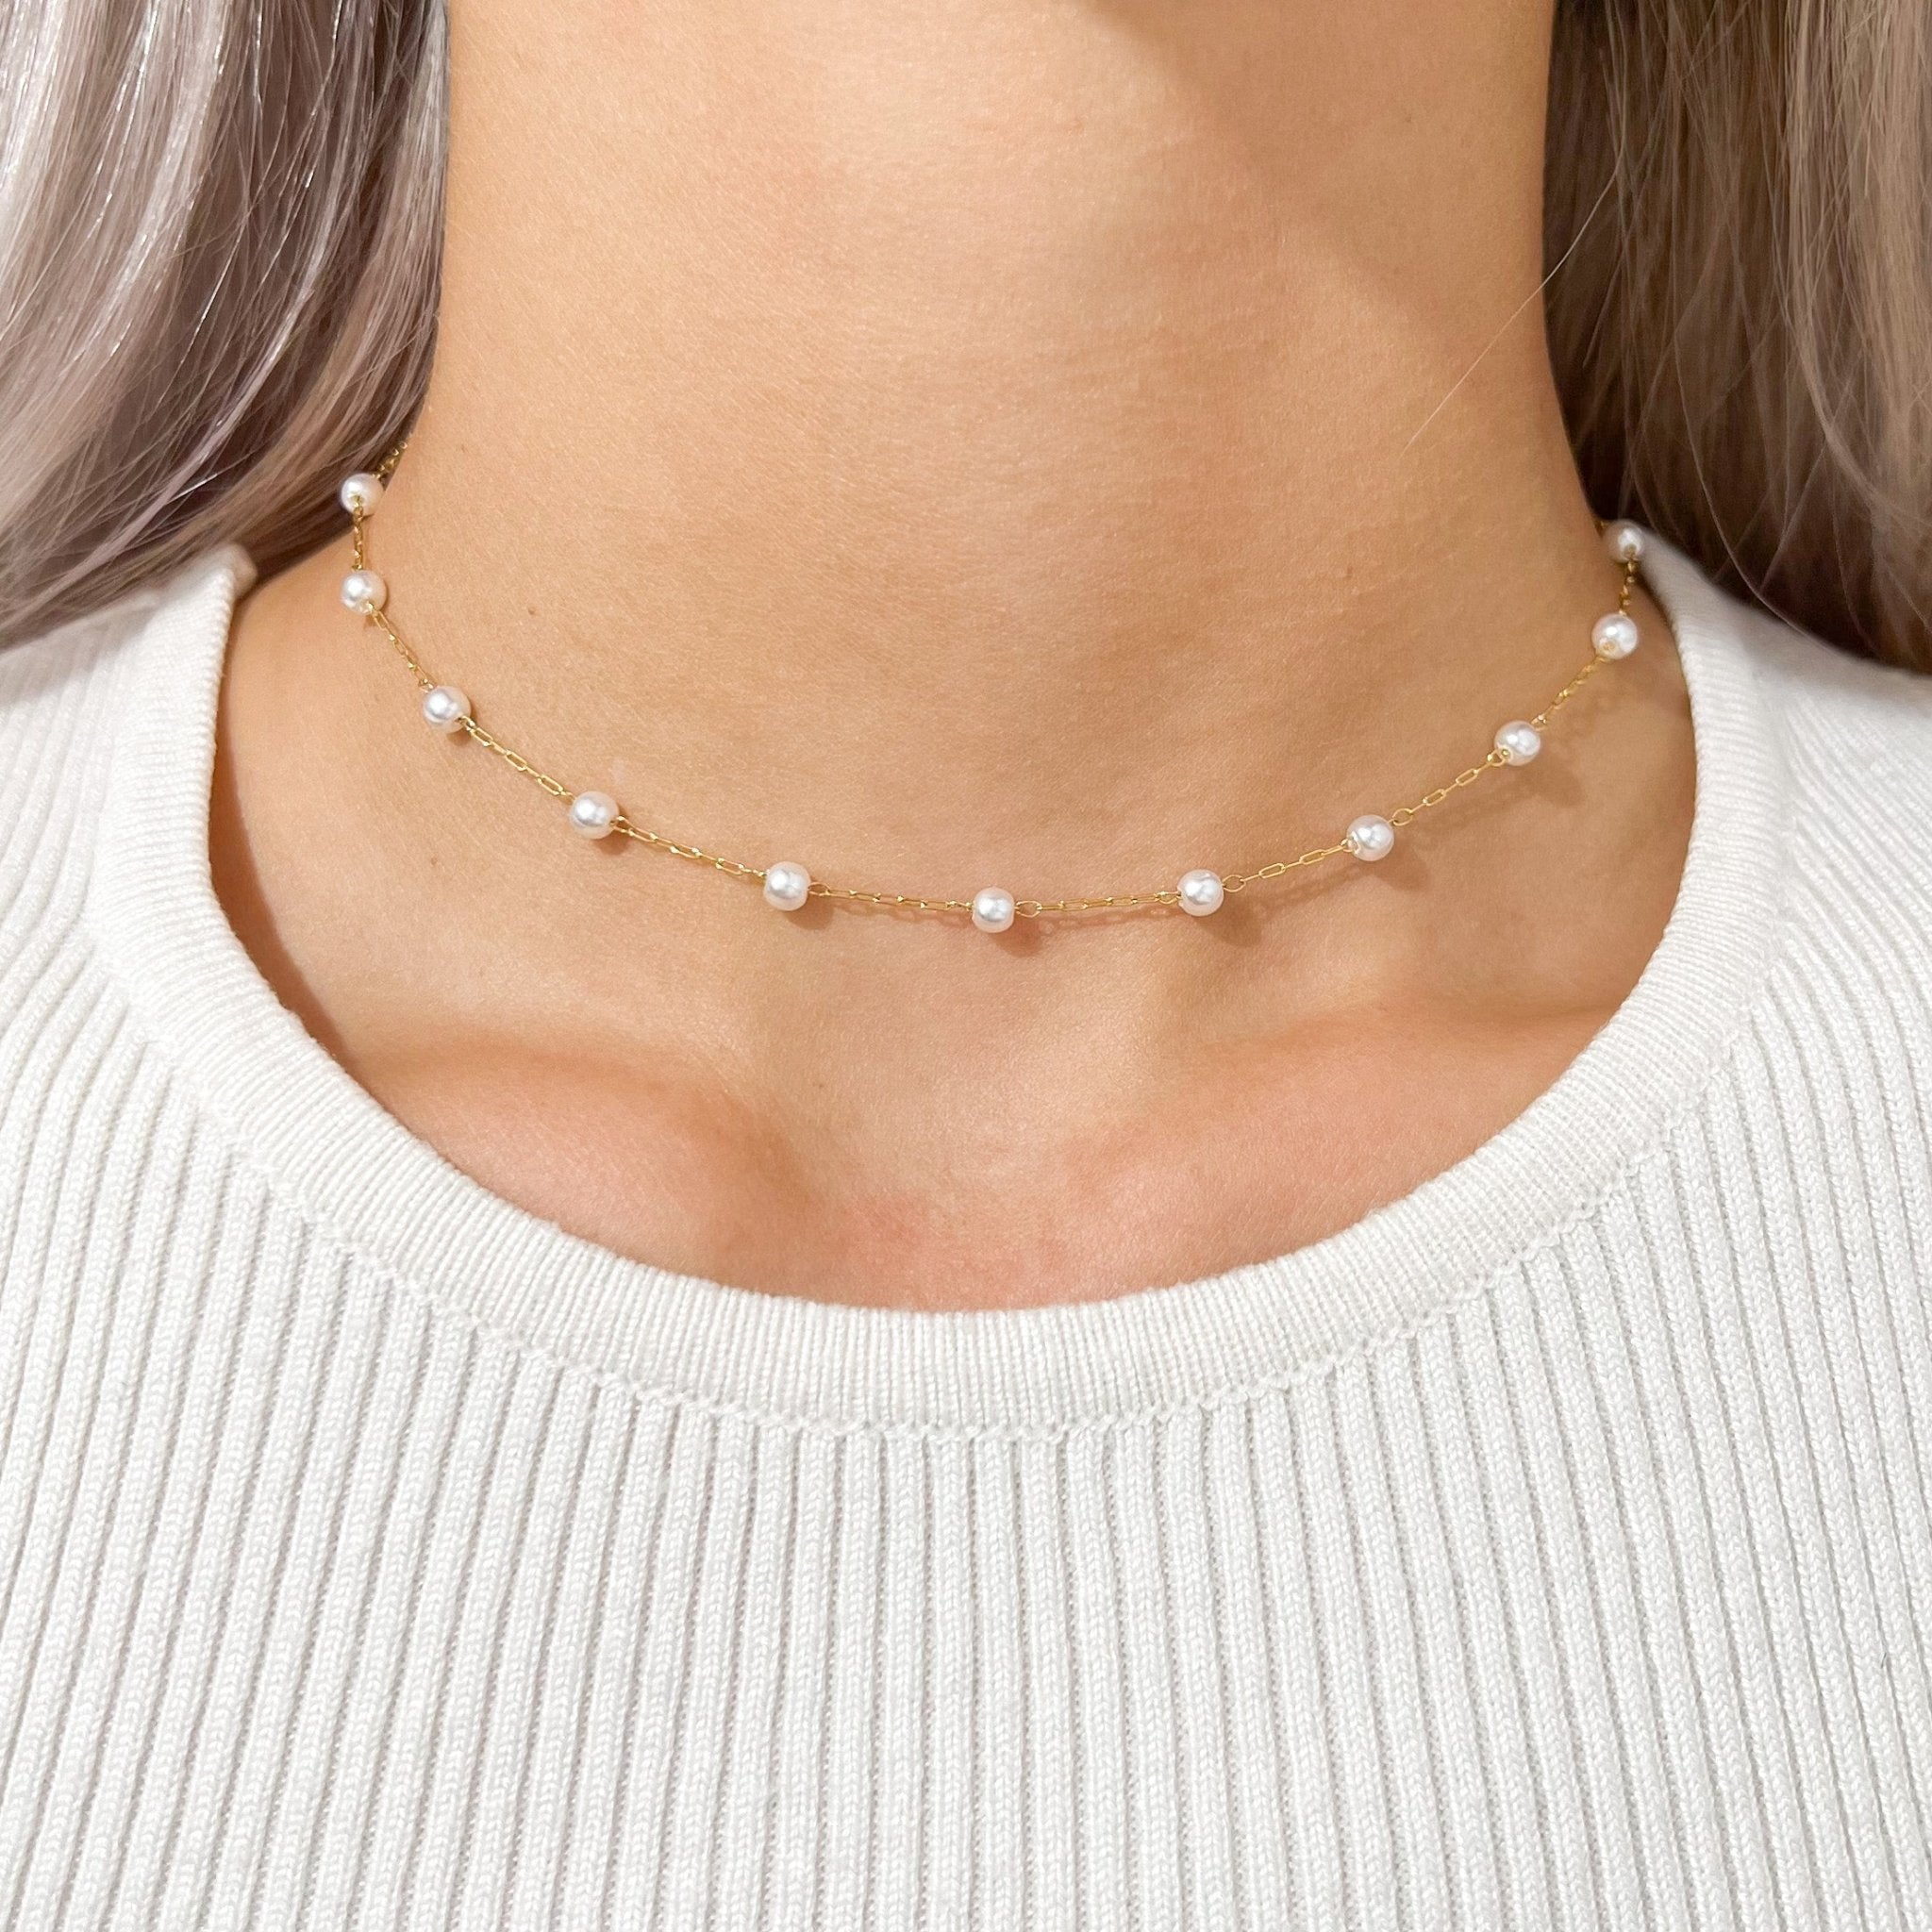 Faux Pearl Choker Necklace in Gold - Flaire & Co.